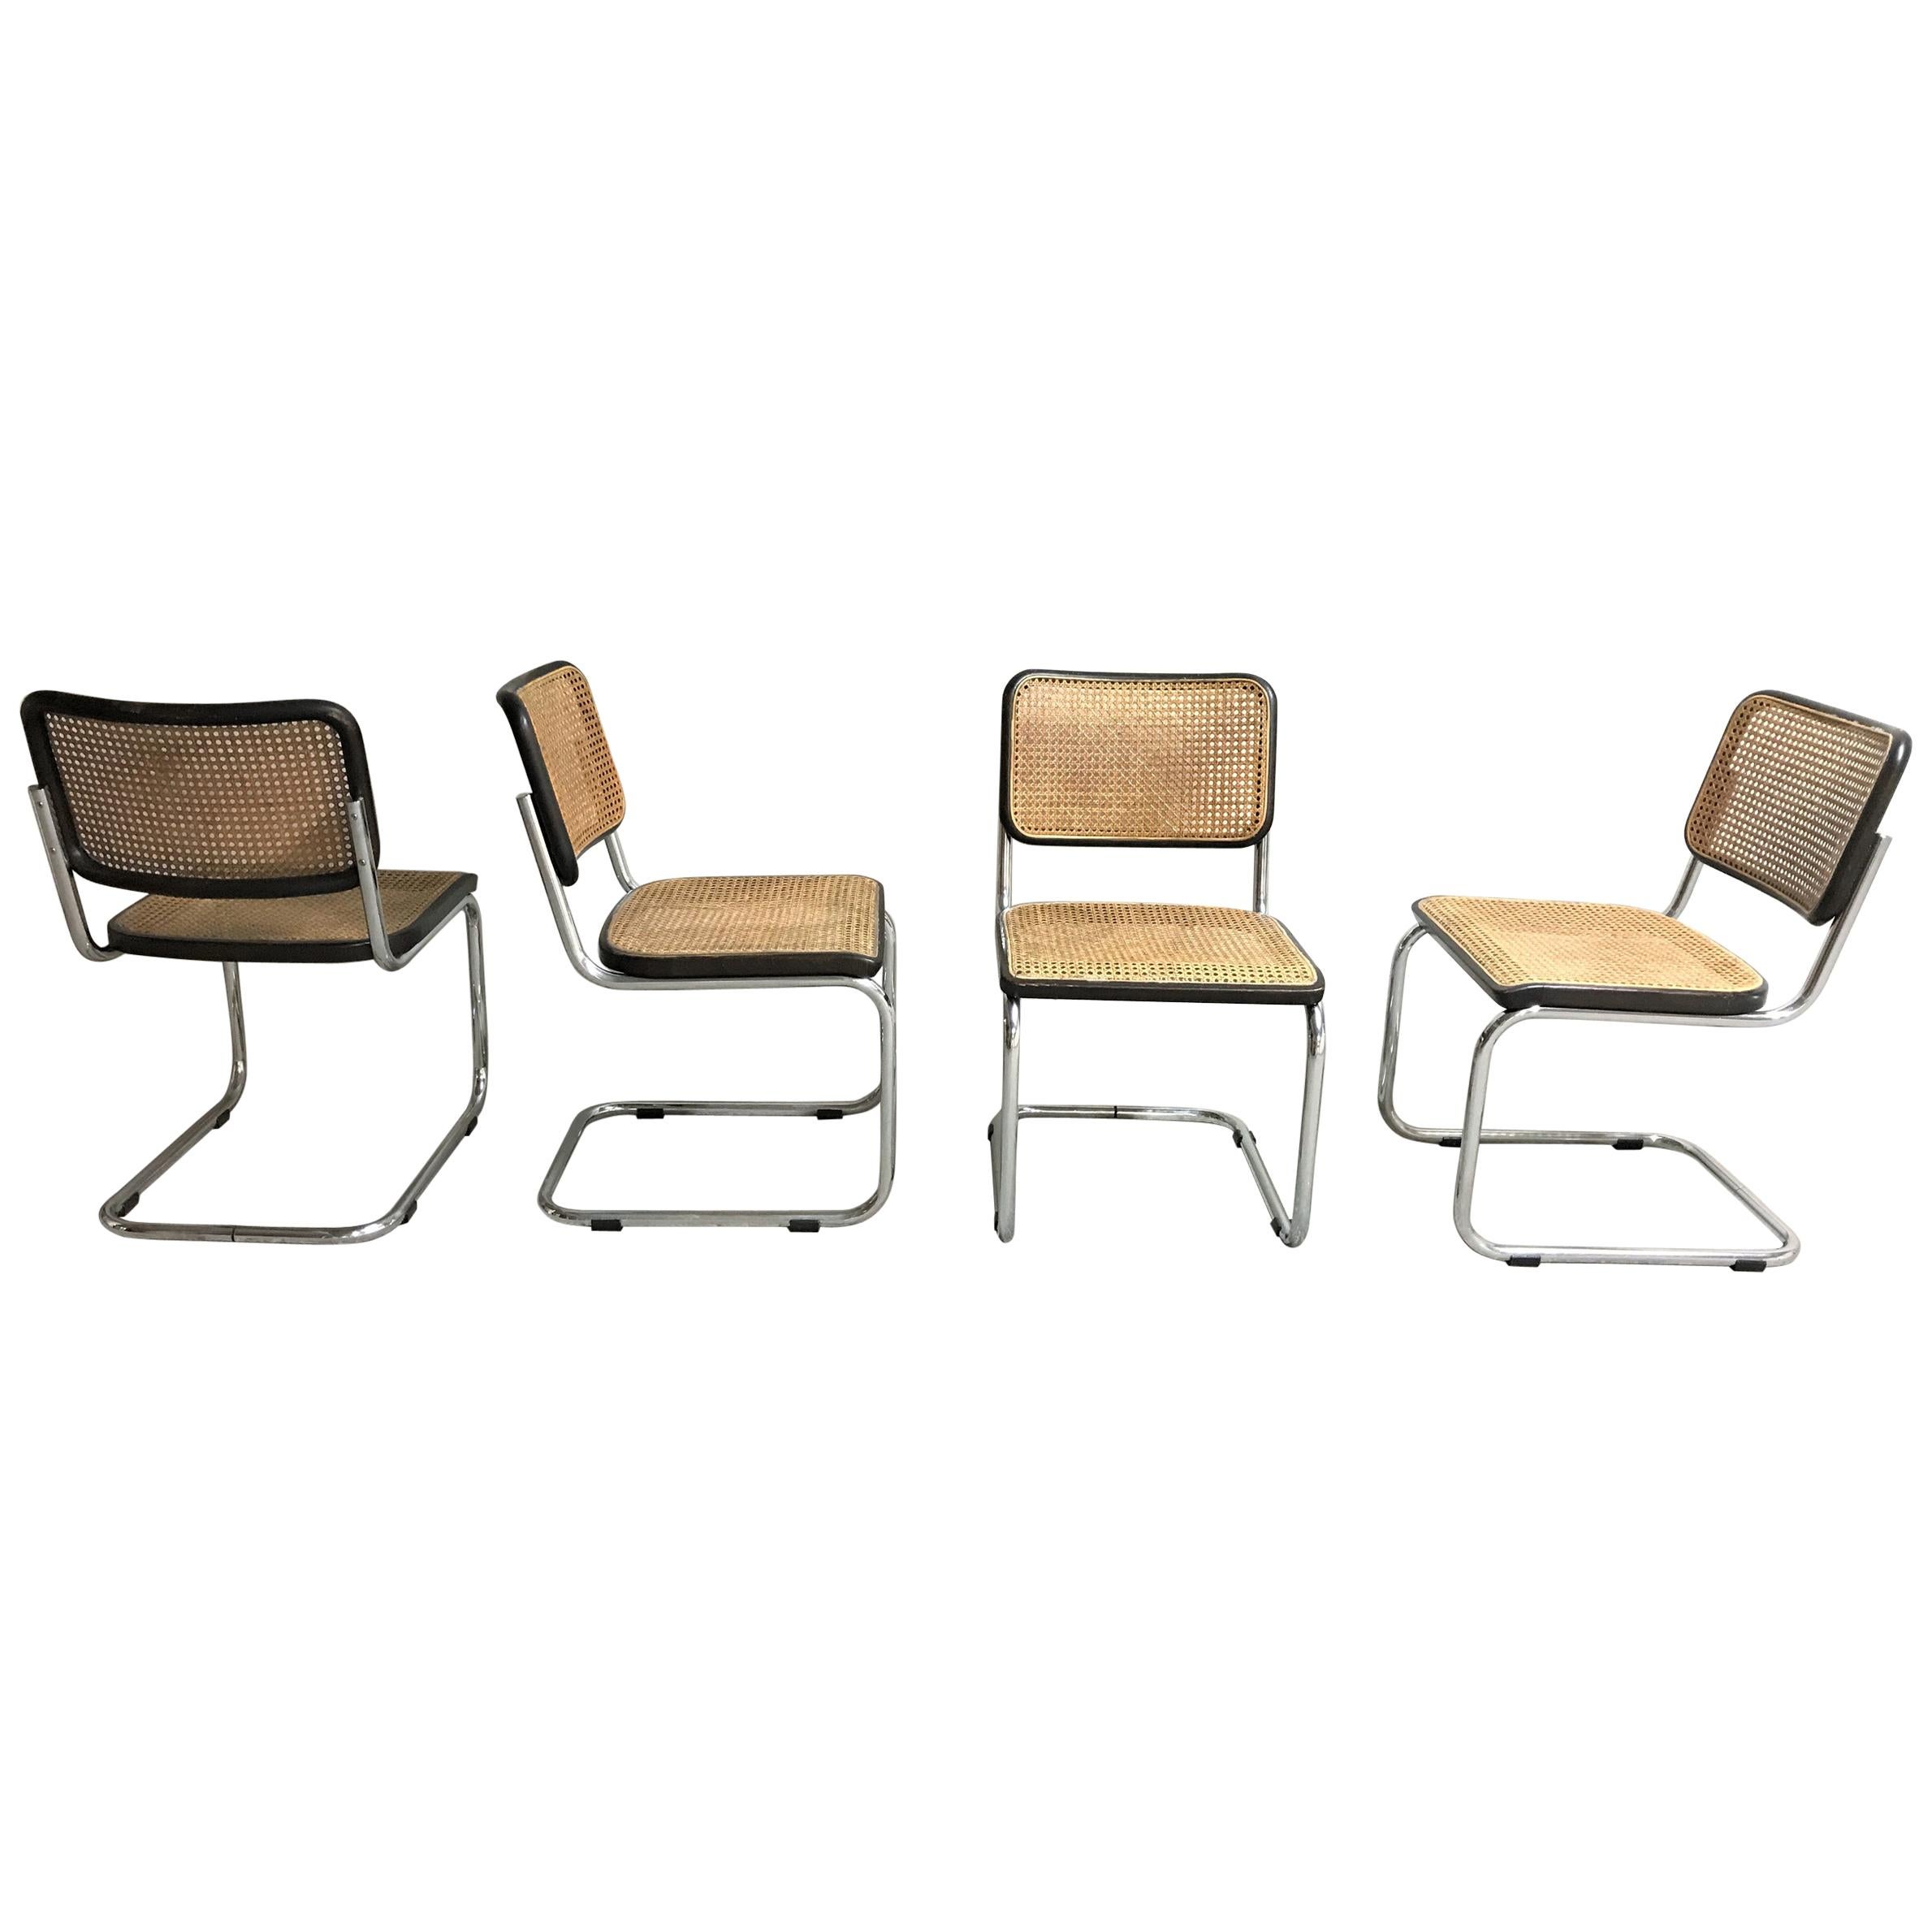 Set of 4 Cesca B32 side chairs by Marcel Breuer for Thonet